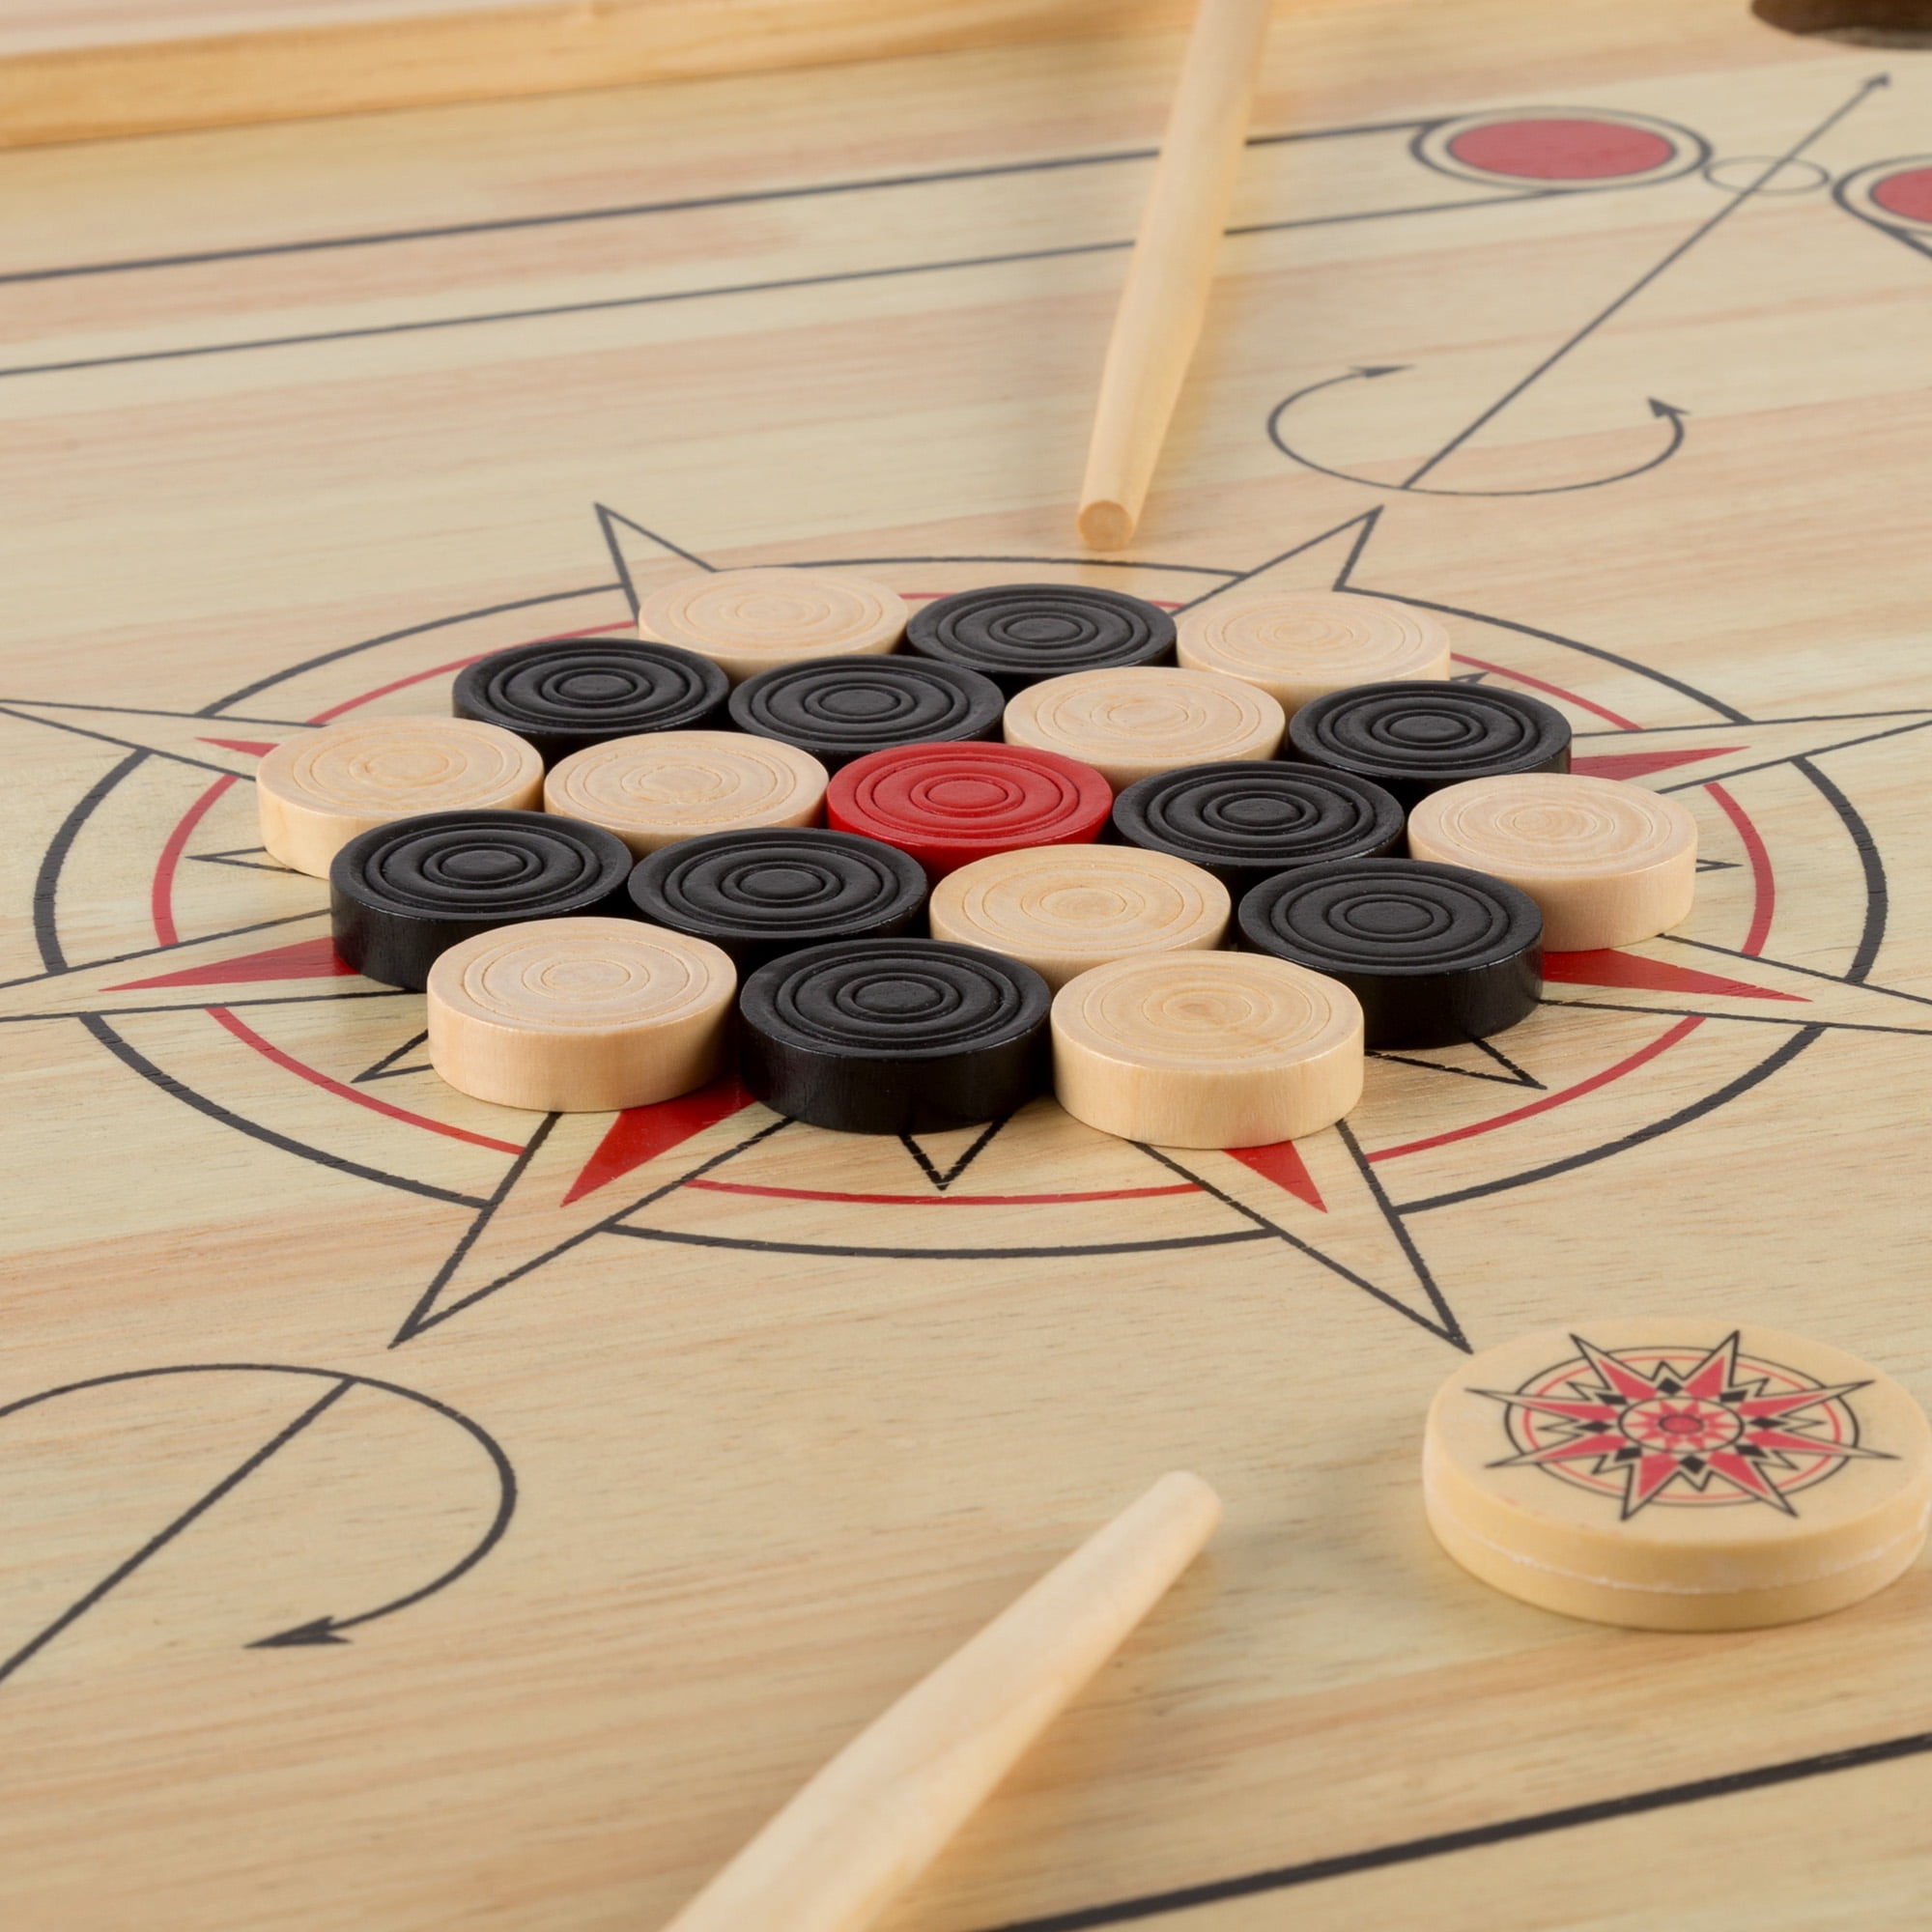 Pro 33" Large Carrom Board Wooden Game With Coins & Striker 296-AOMH 